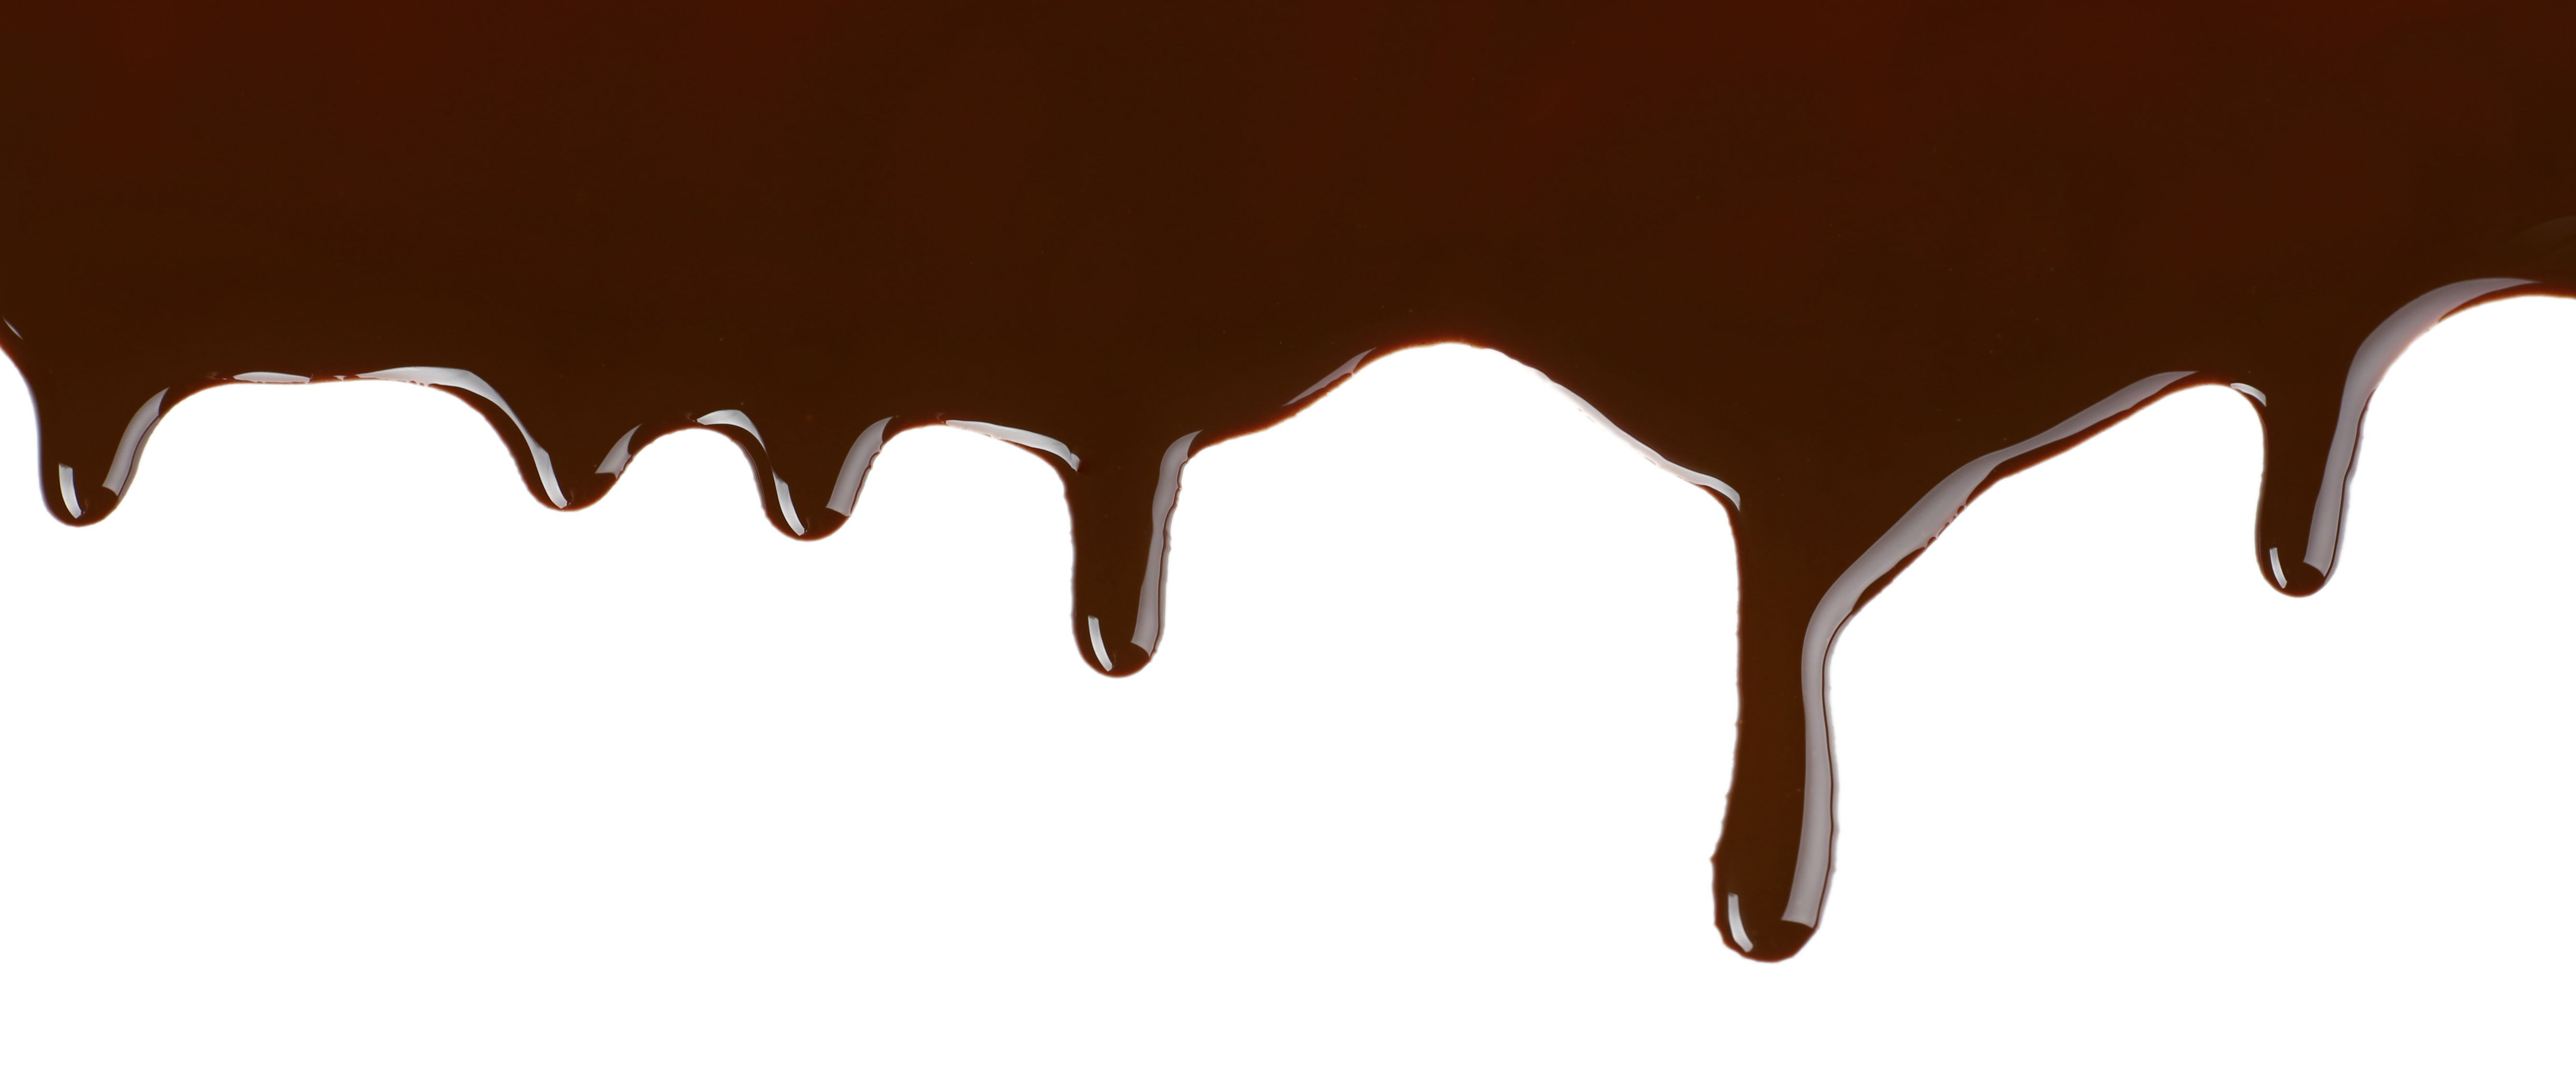 Melted Chocolate Wallpapers - Wallpaper Cave